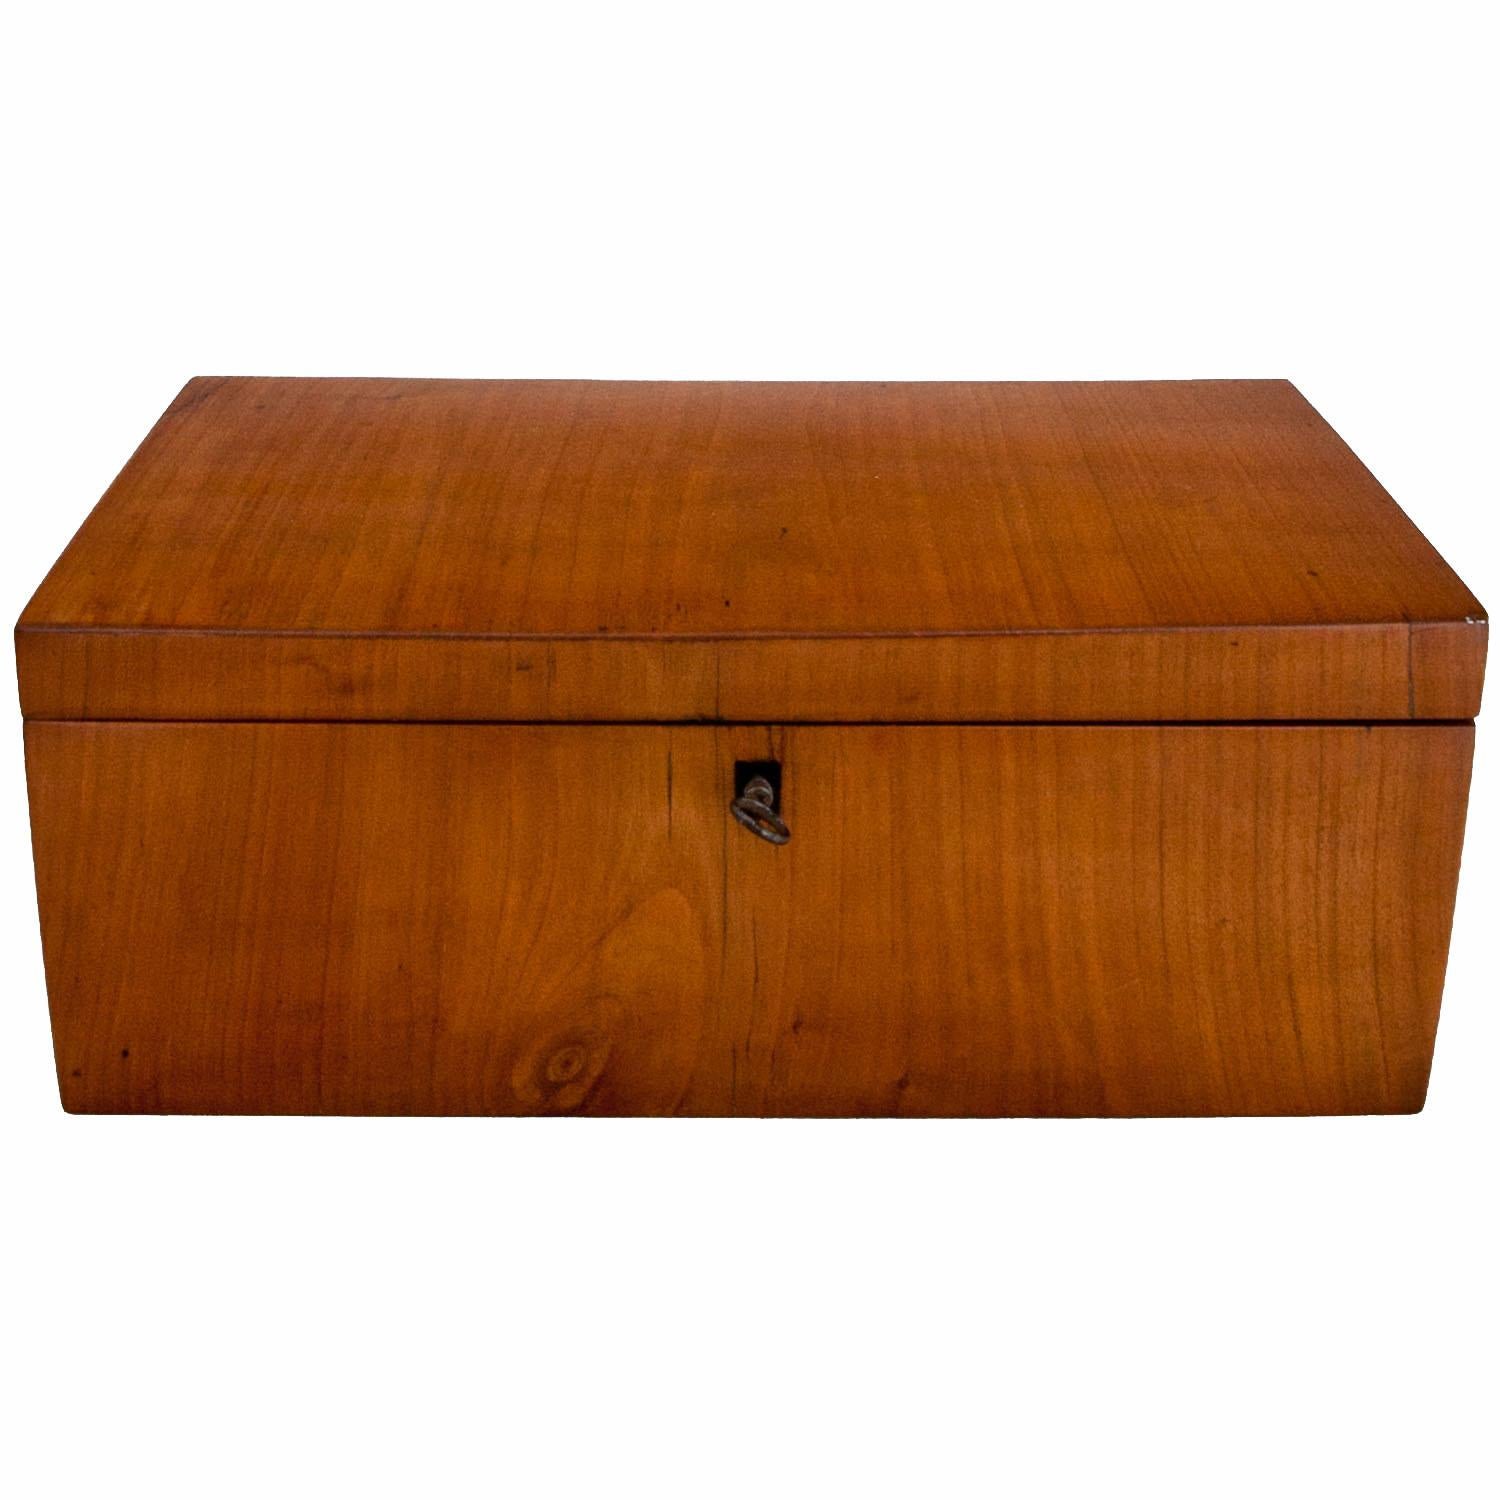 Lockable jewelry box or chest with a hinged lid and a smooth cherrywood corpus.